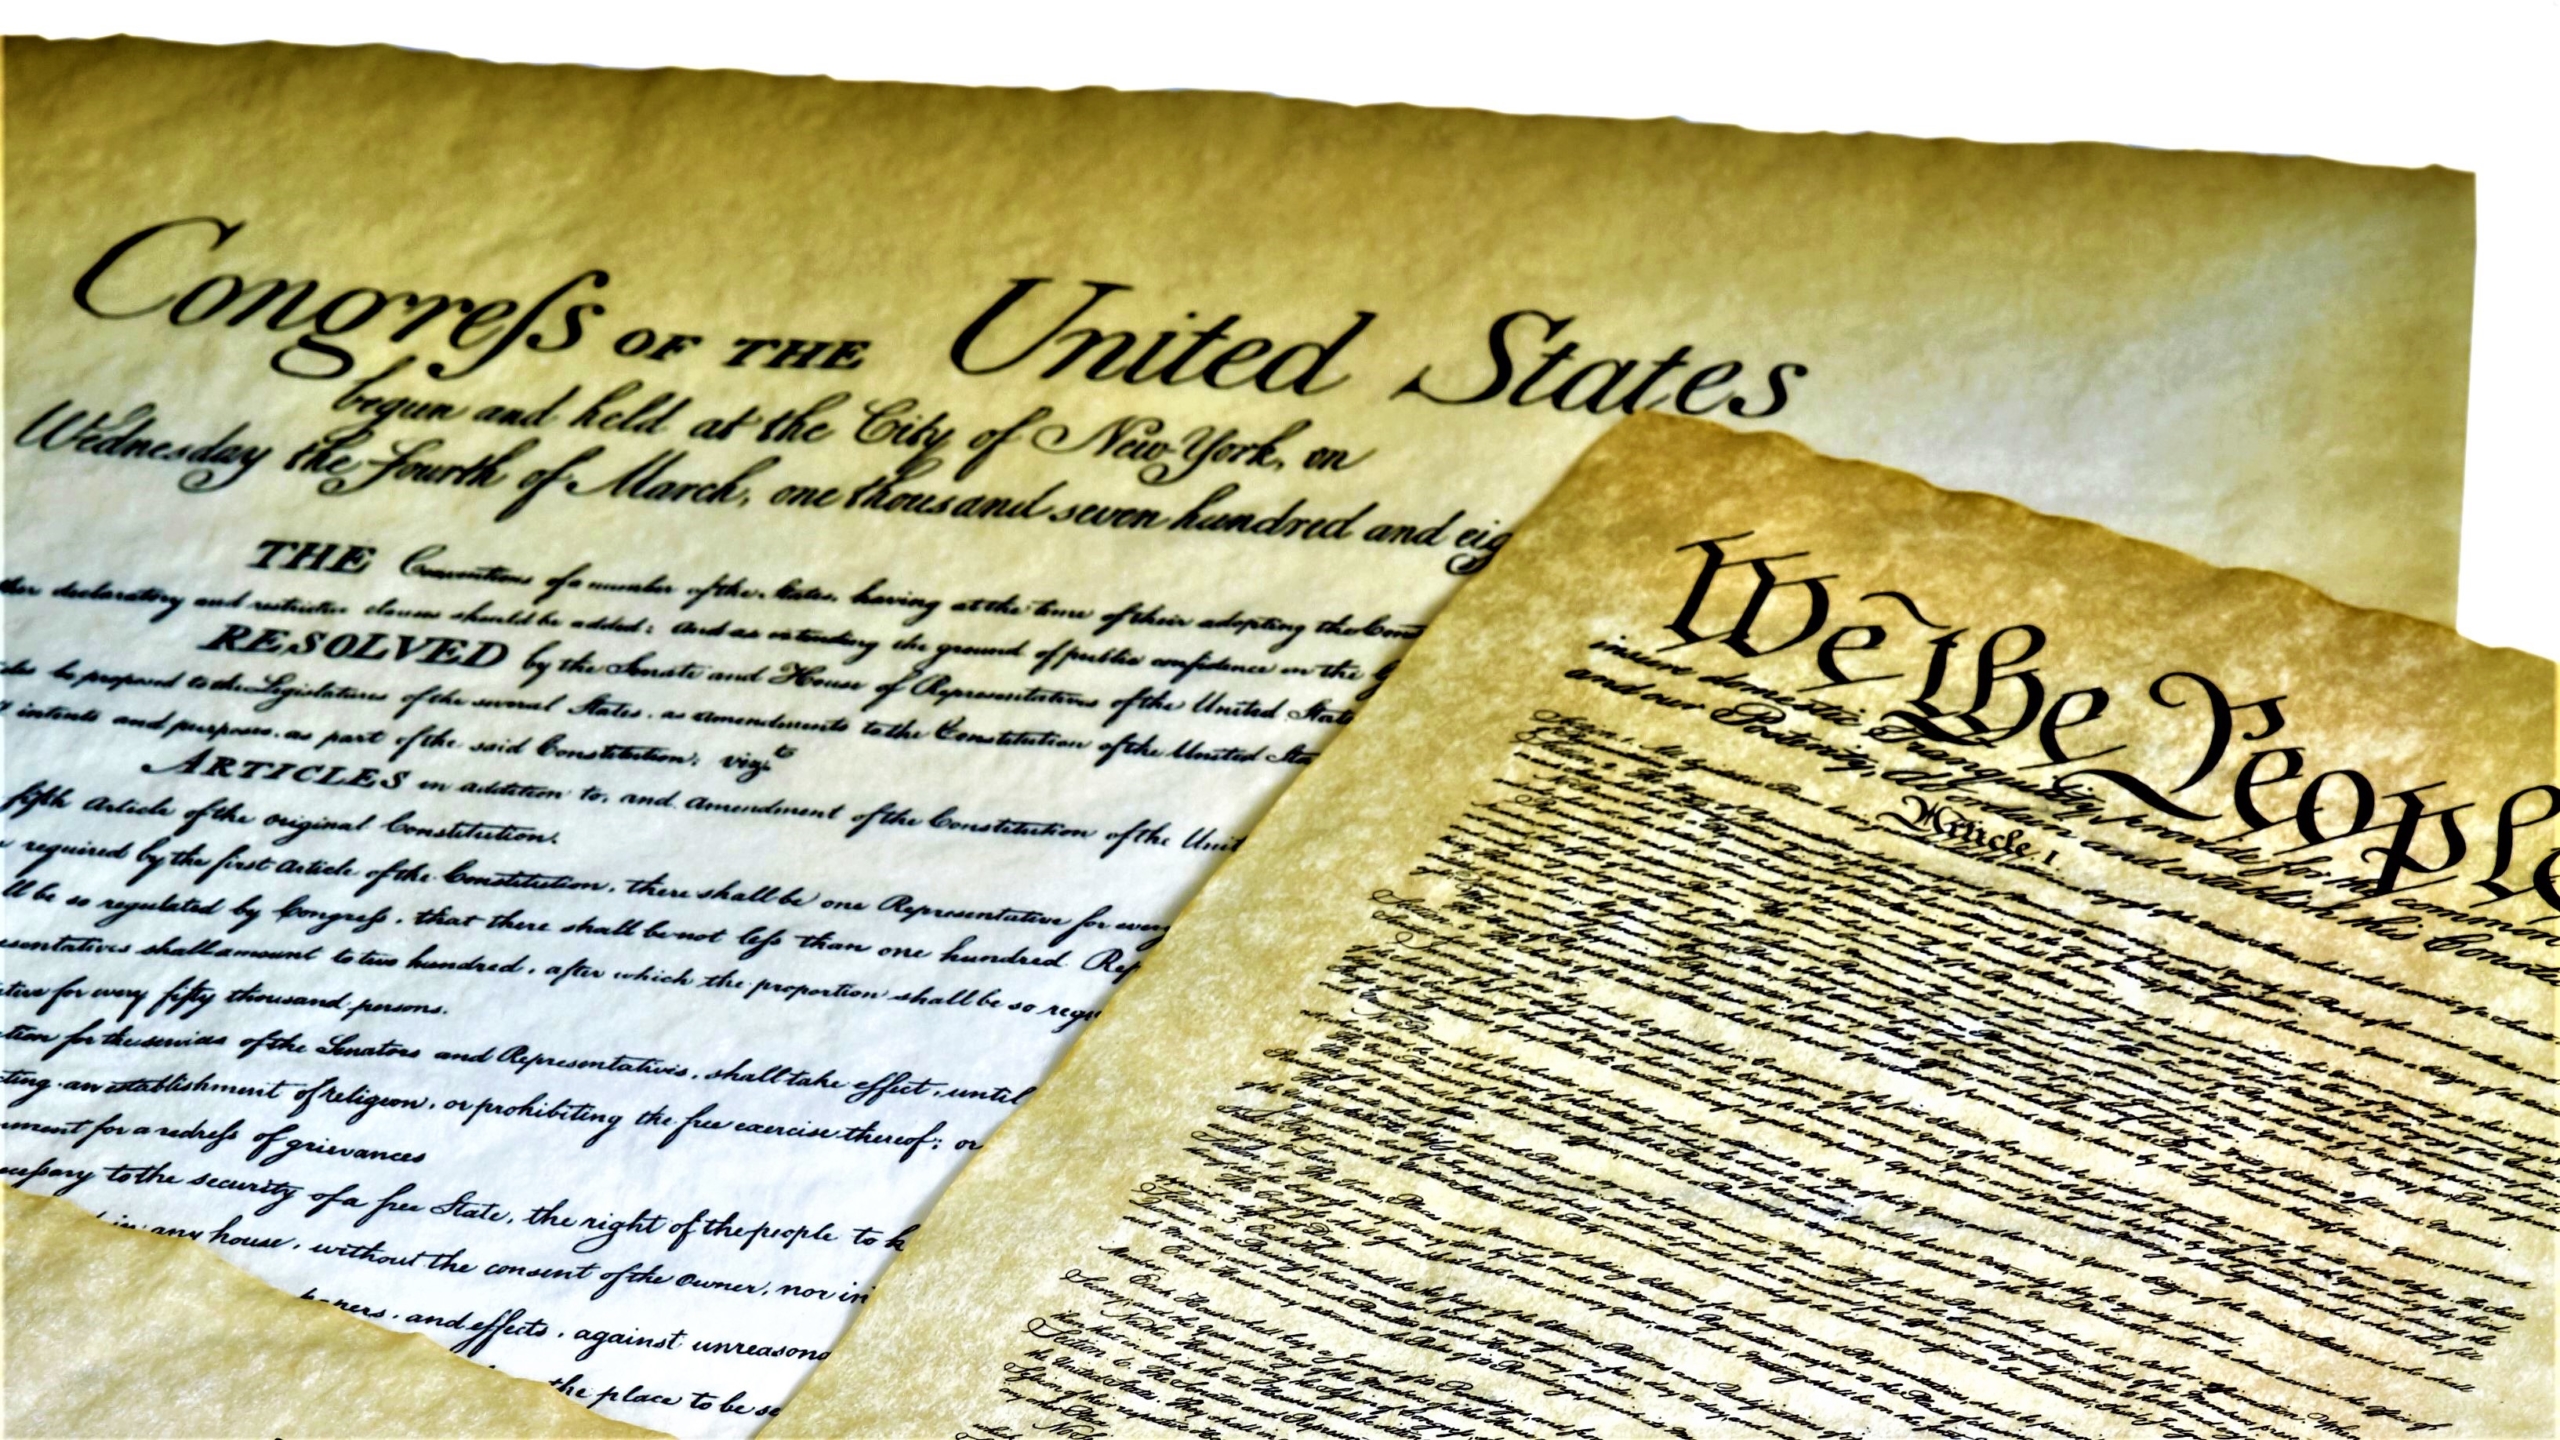 The United States Constitution as a Bill of Rights - Constituting America